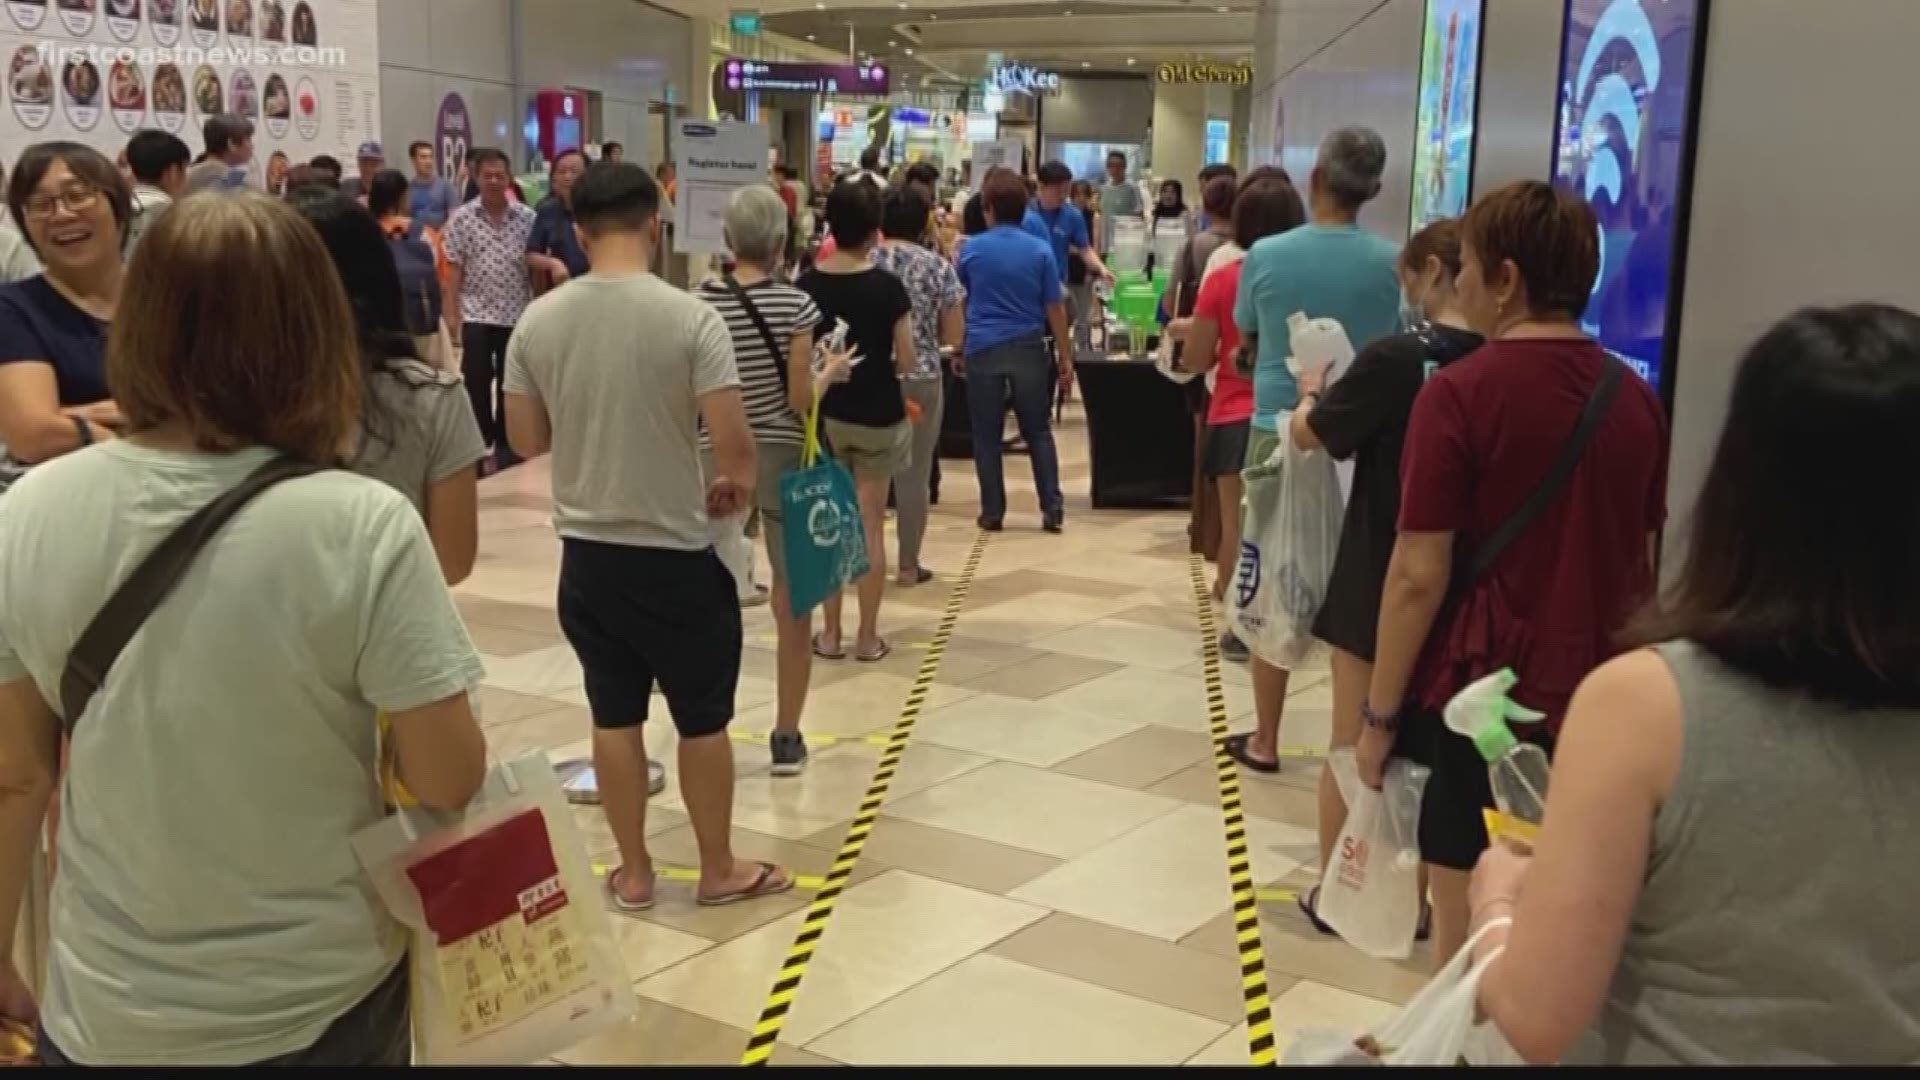 Singapore is asking people to stay at least three feet apart and is advertising social distancing recommendations at banks, malls and restaurants.